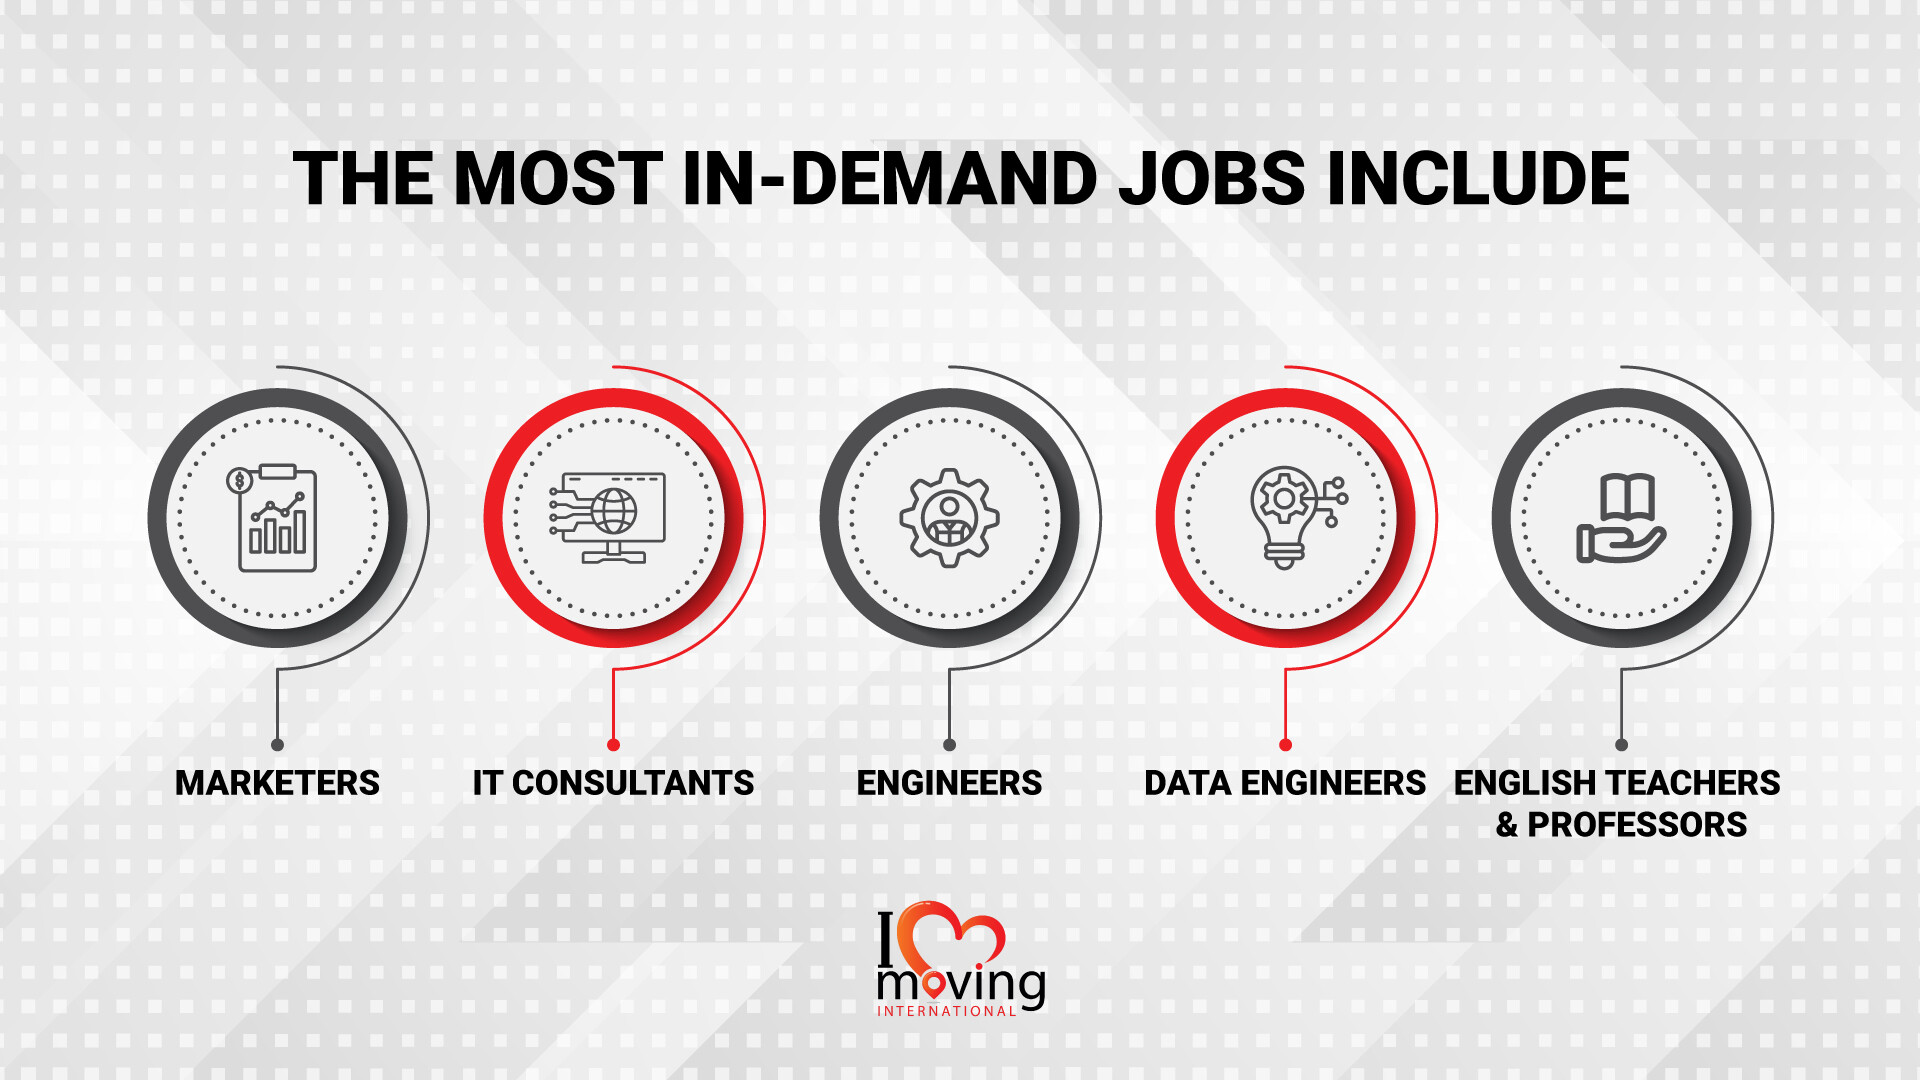 Infographic featuring the most in-demand jobs for expats in Rome, Italy